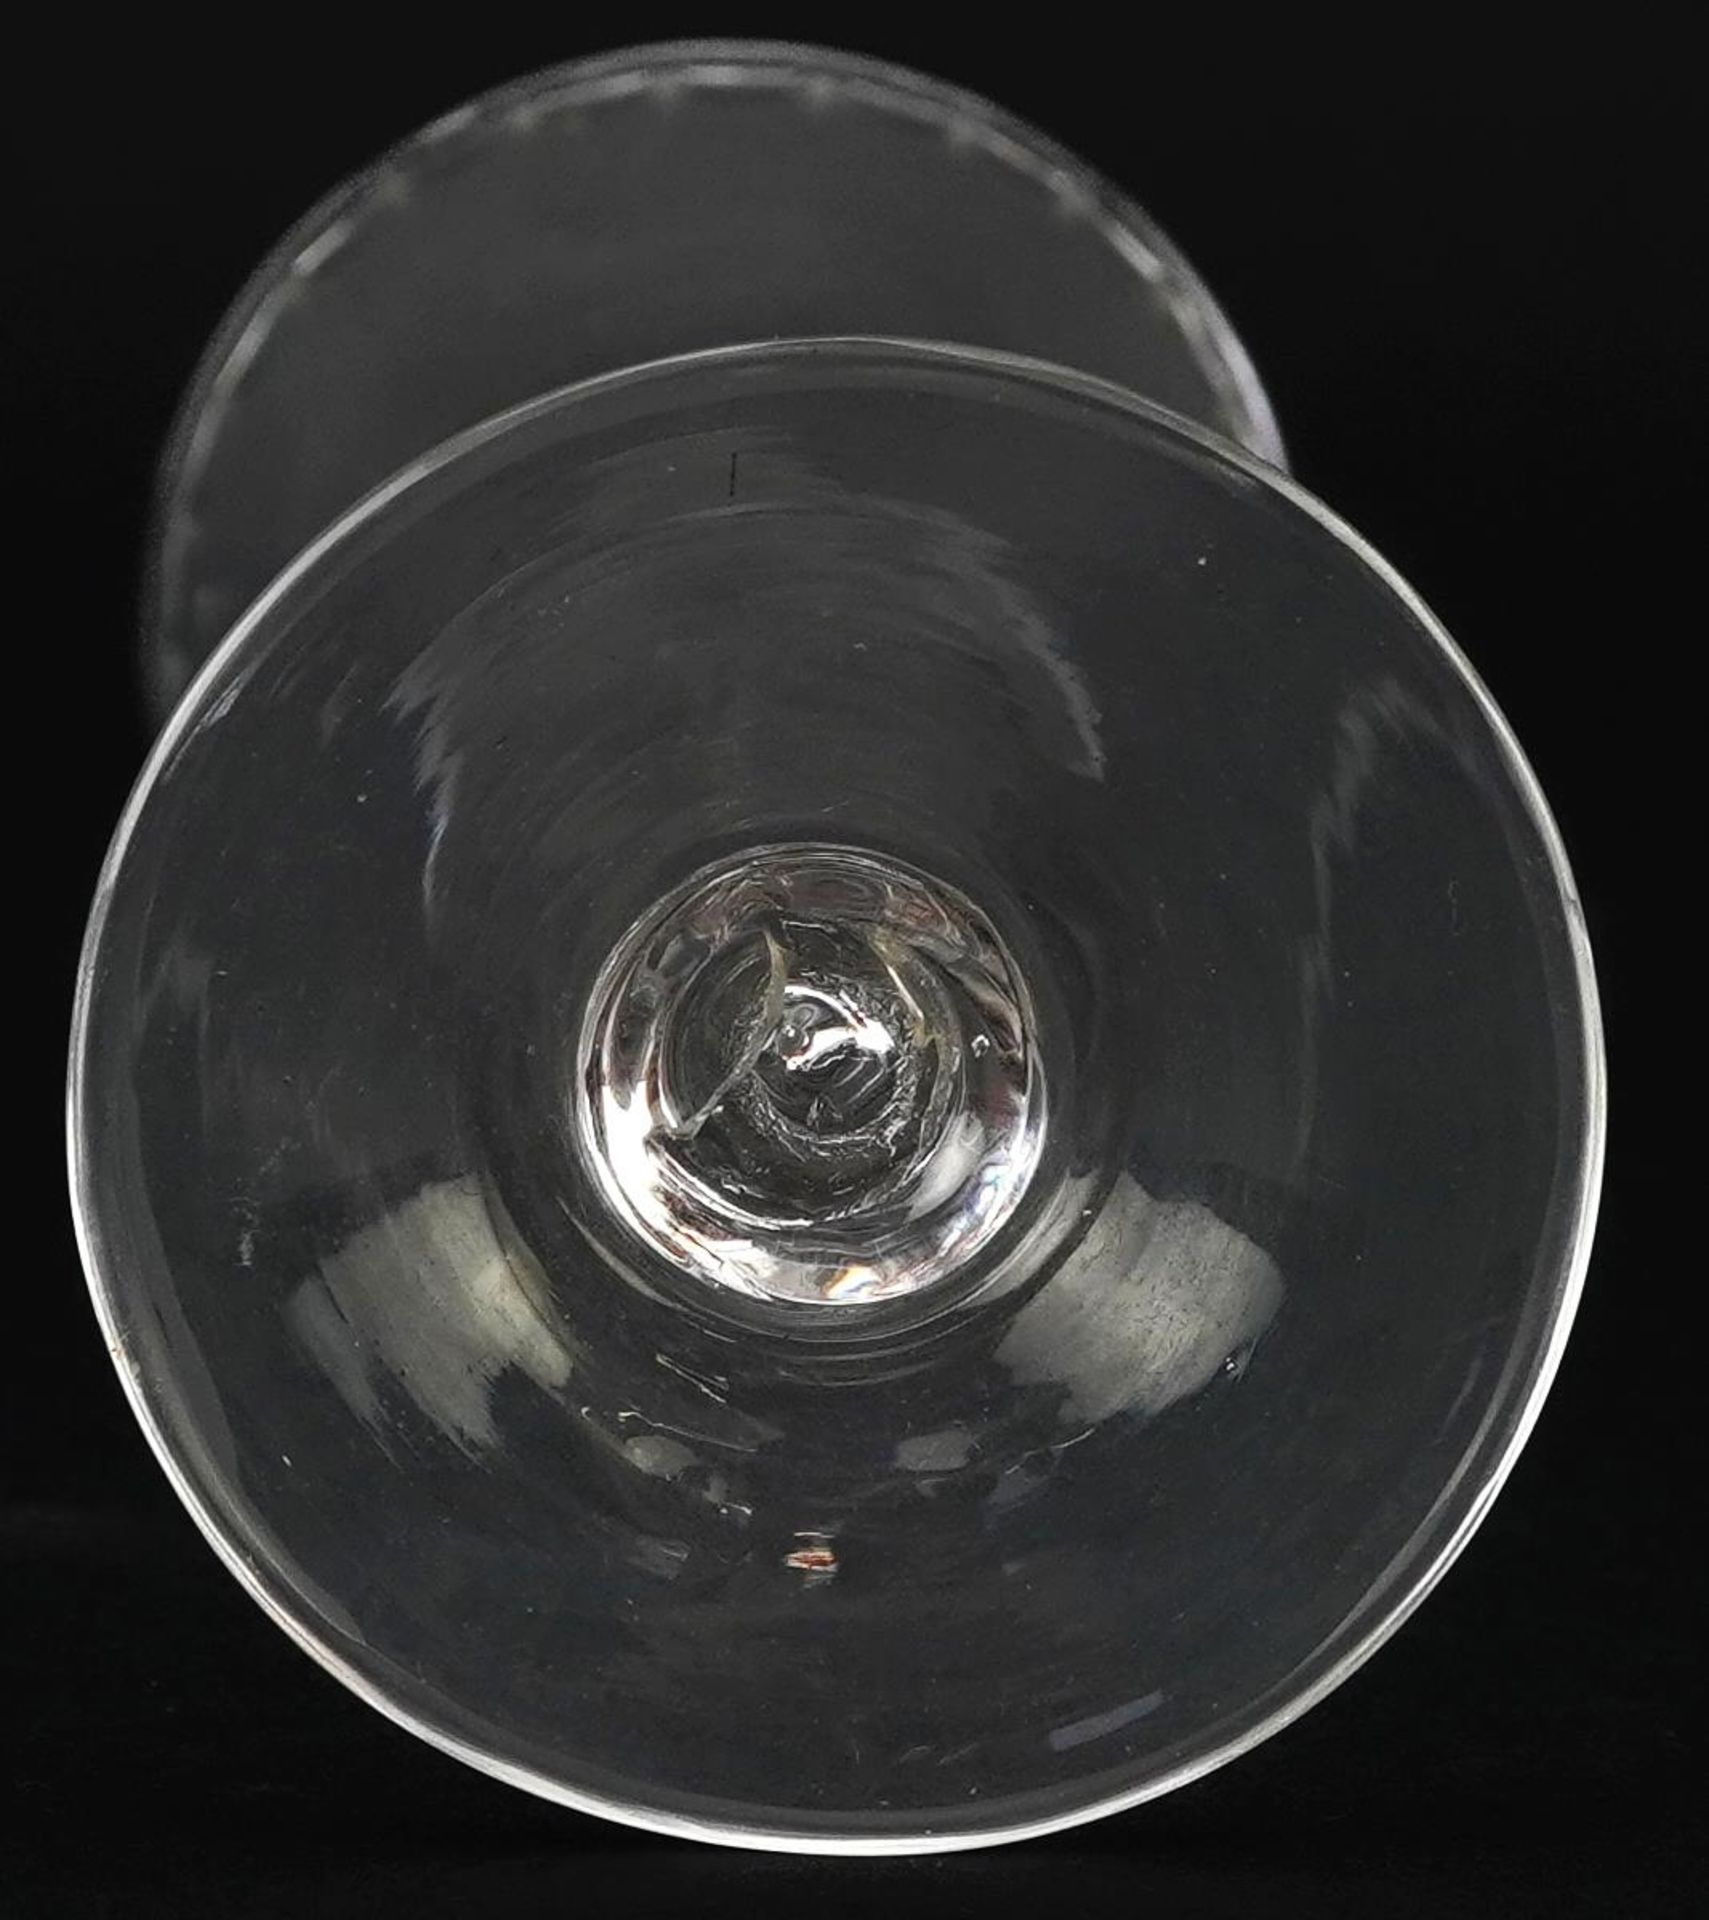 18th century excise wine glass with hollow stem, 15cm high - Image 4 of 4